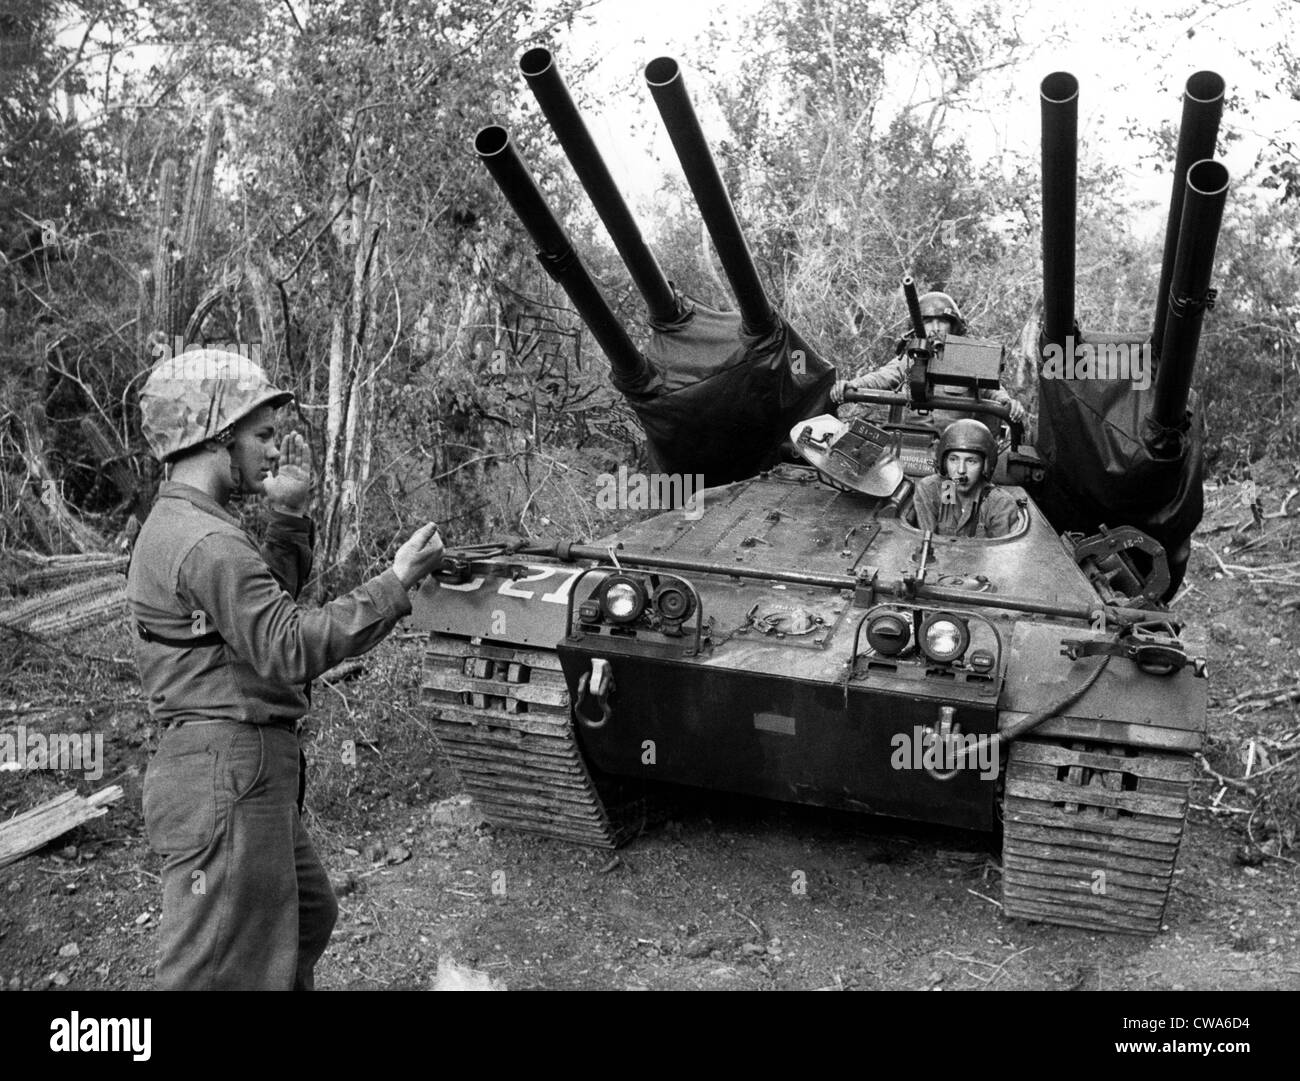 Cuban Missile Crisis, Marine Pfc. Thomas J. Wesley directing an Ontos anti-tank weapon in preparation against suprise attacks, Stock Photo